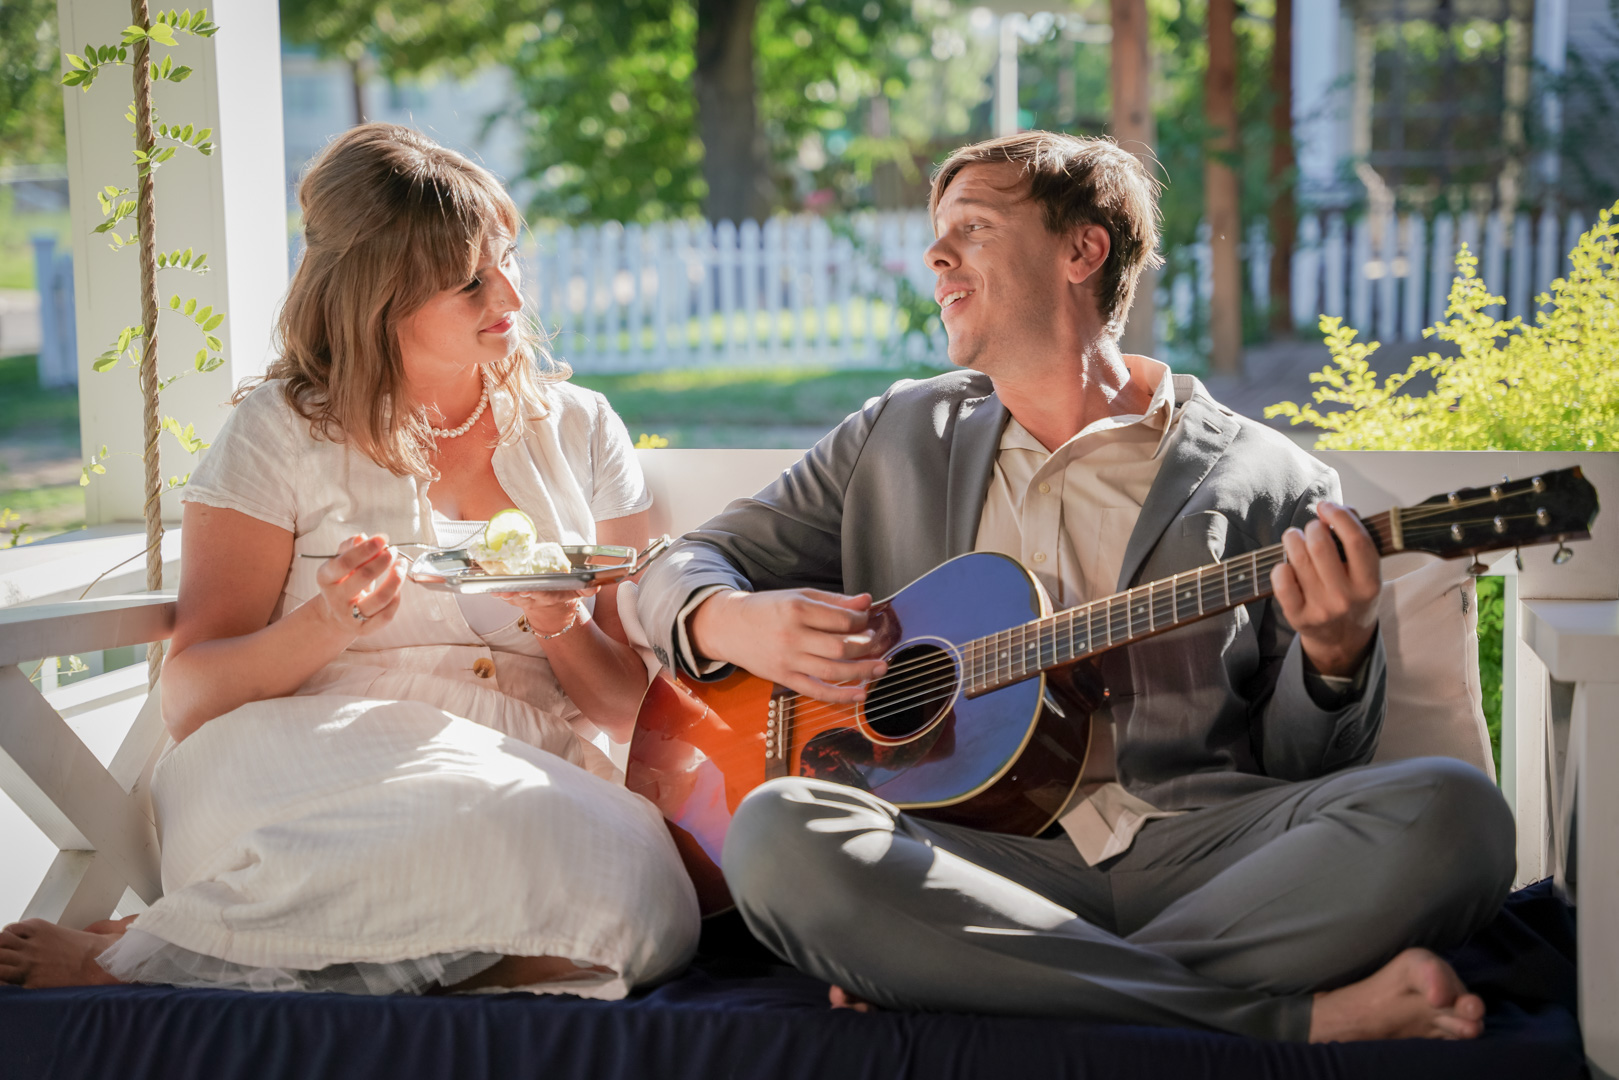 A woman and man istting on a porch swing, the man is playing guitar and singing to the woman